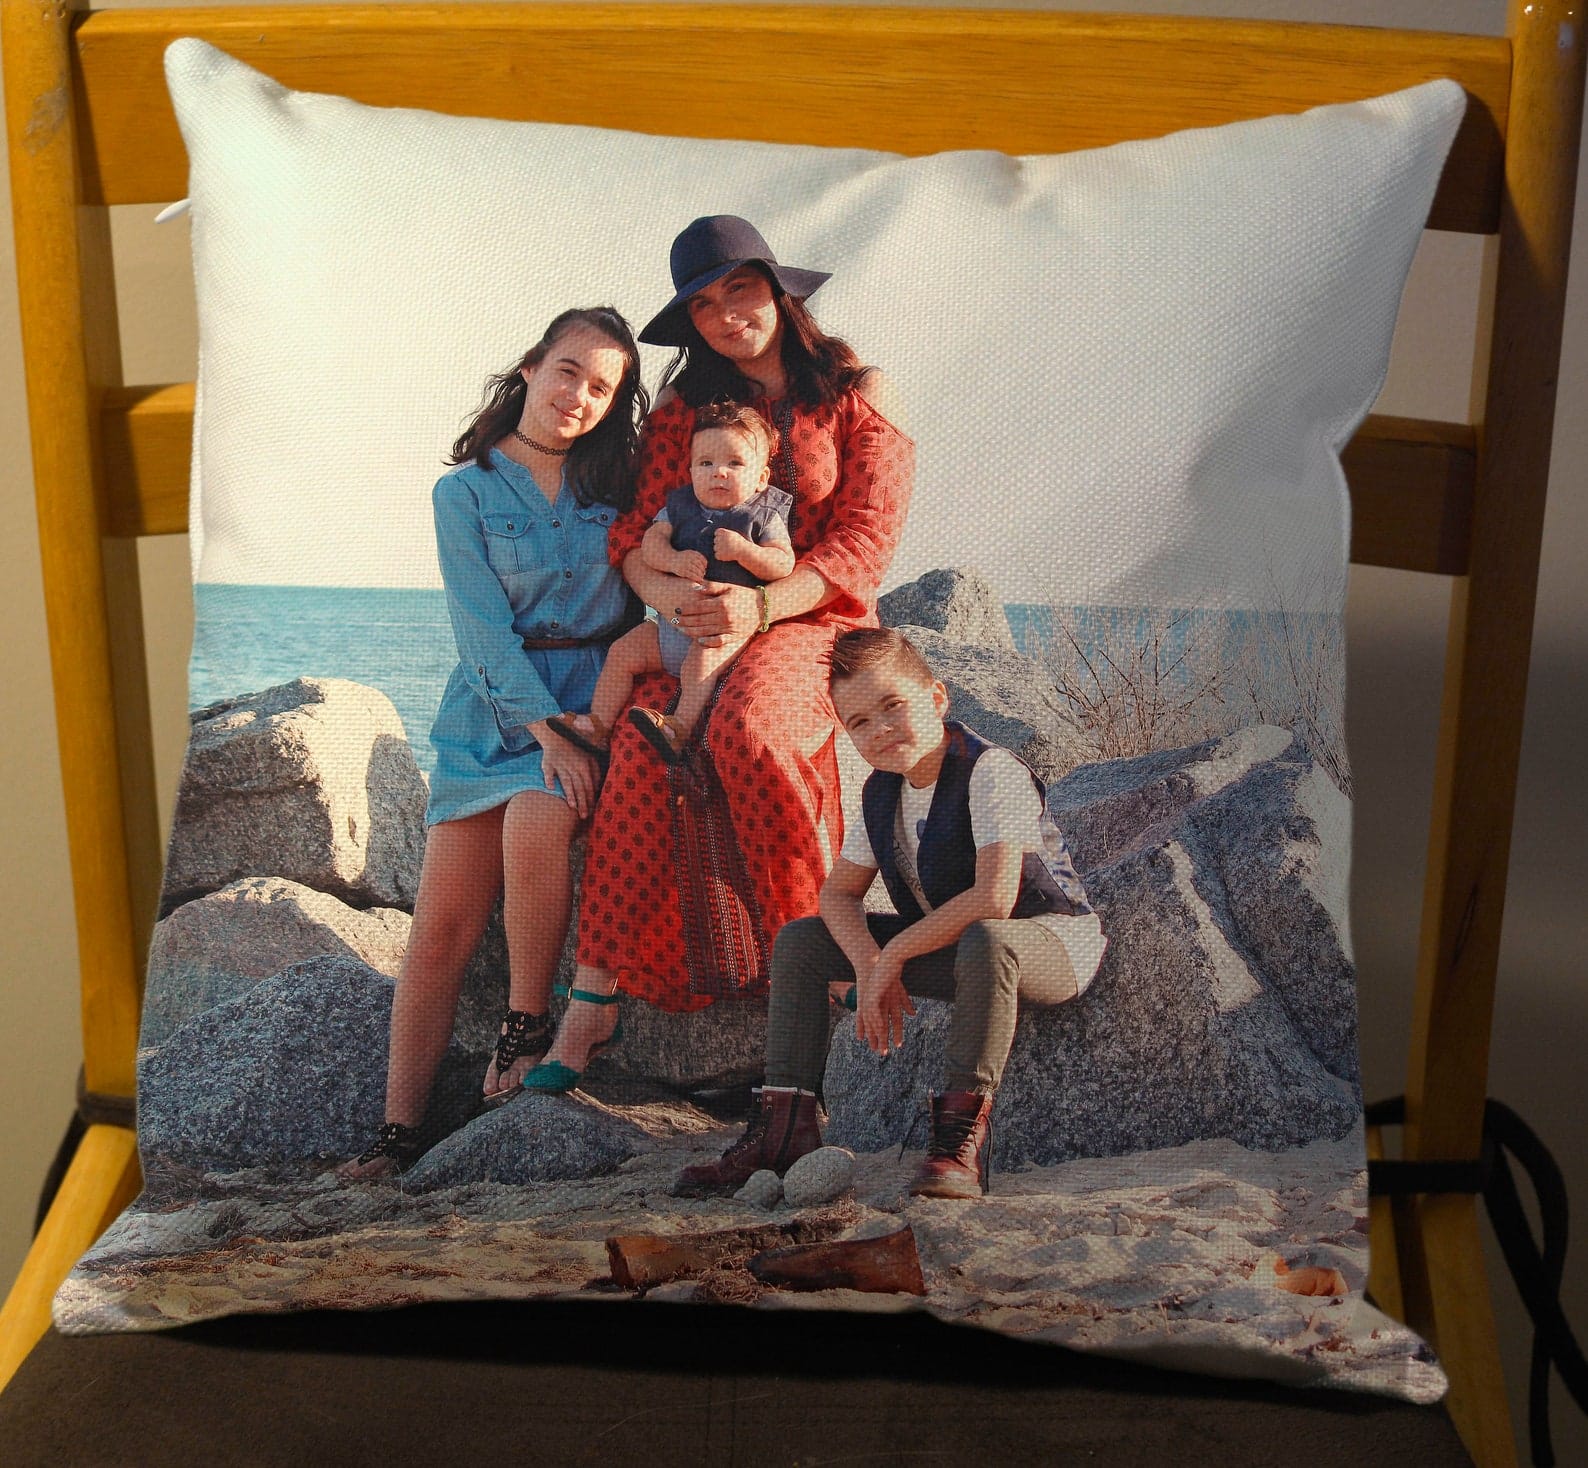  Custom Pillow, Personalized Photo Pillows, 16 x 16